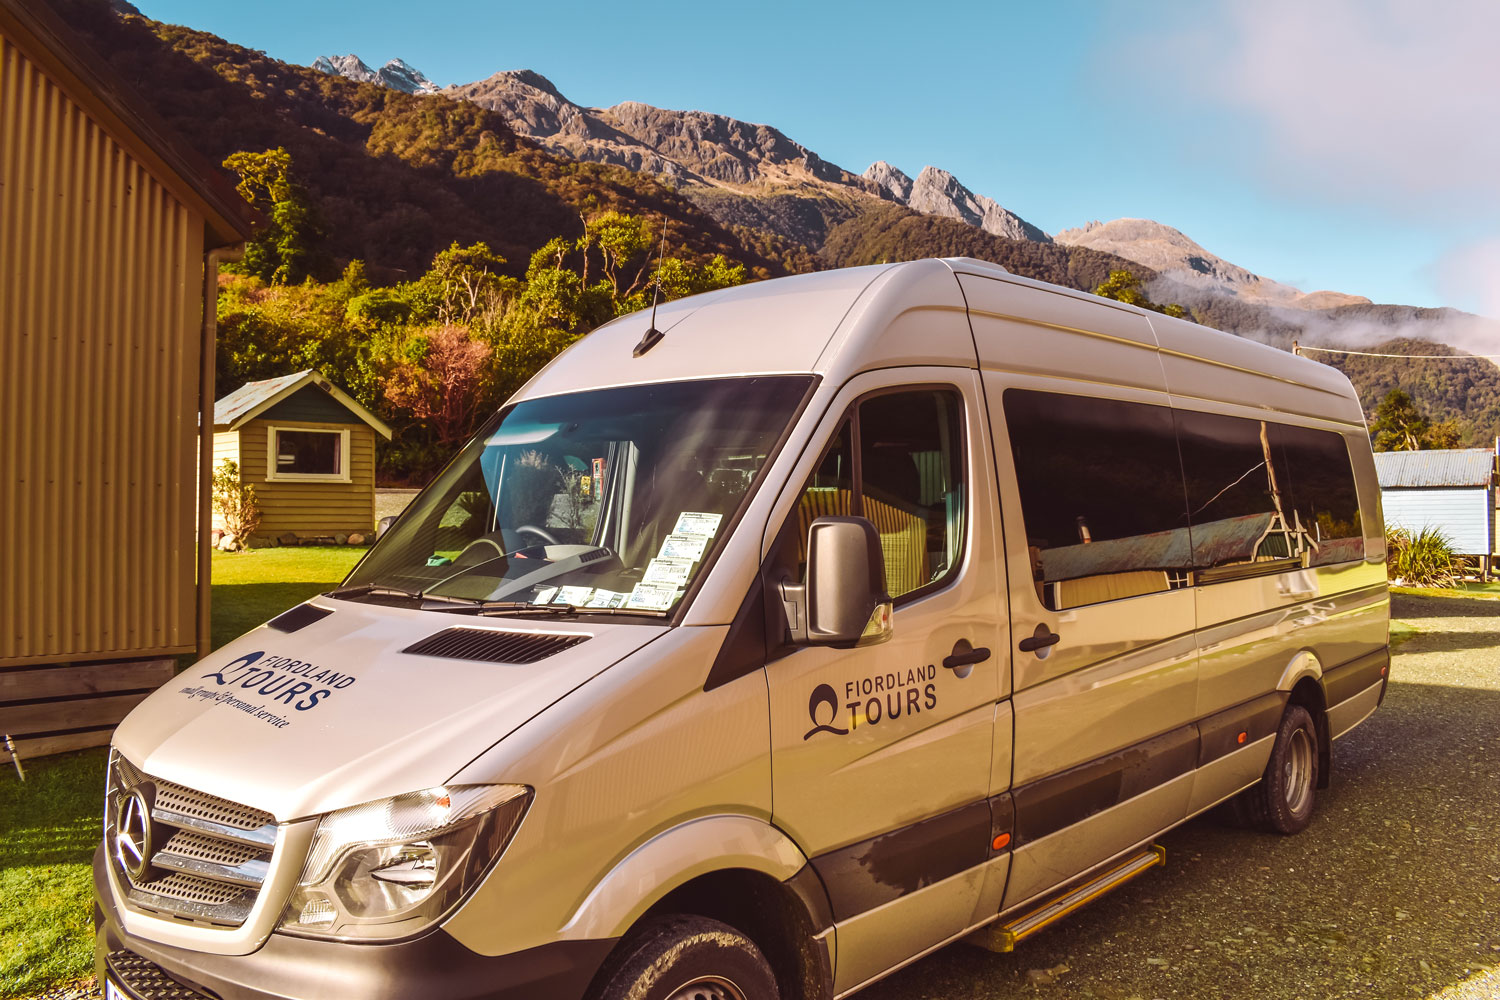 Fiordland Tours small and comfortable coaches are limited to 15 people.